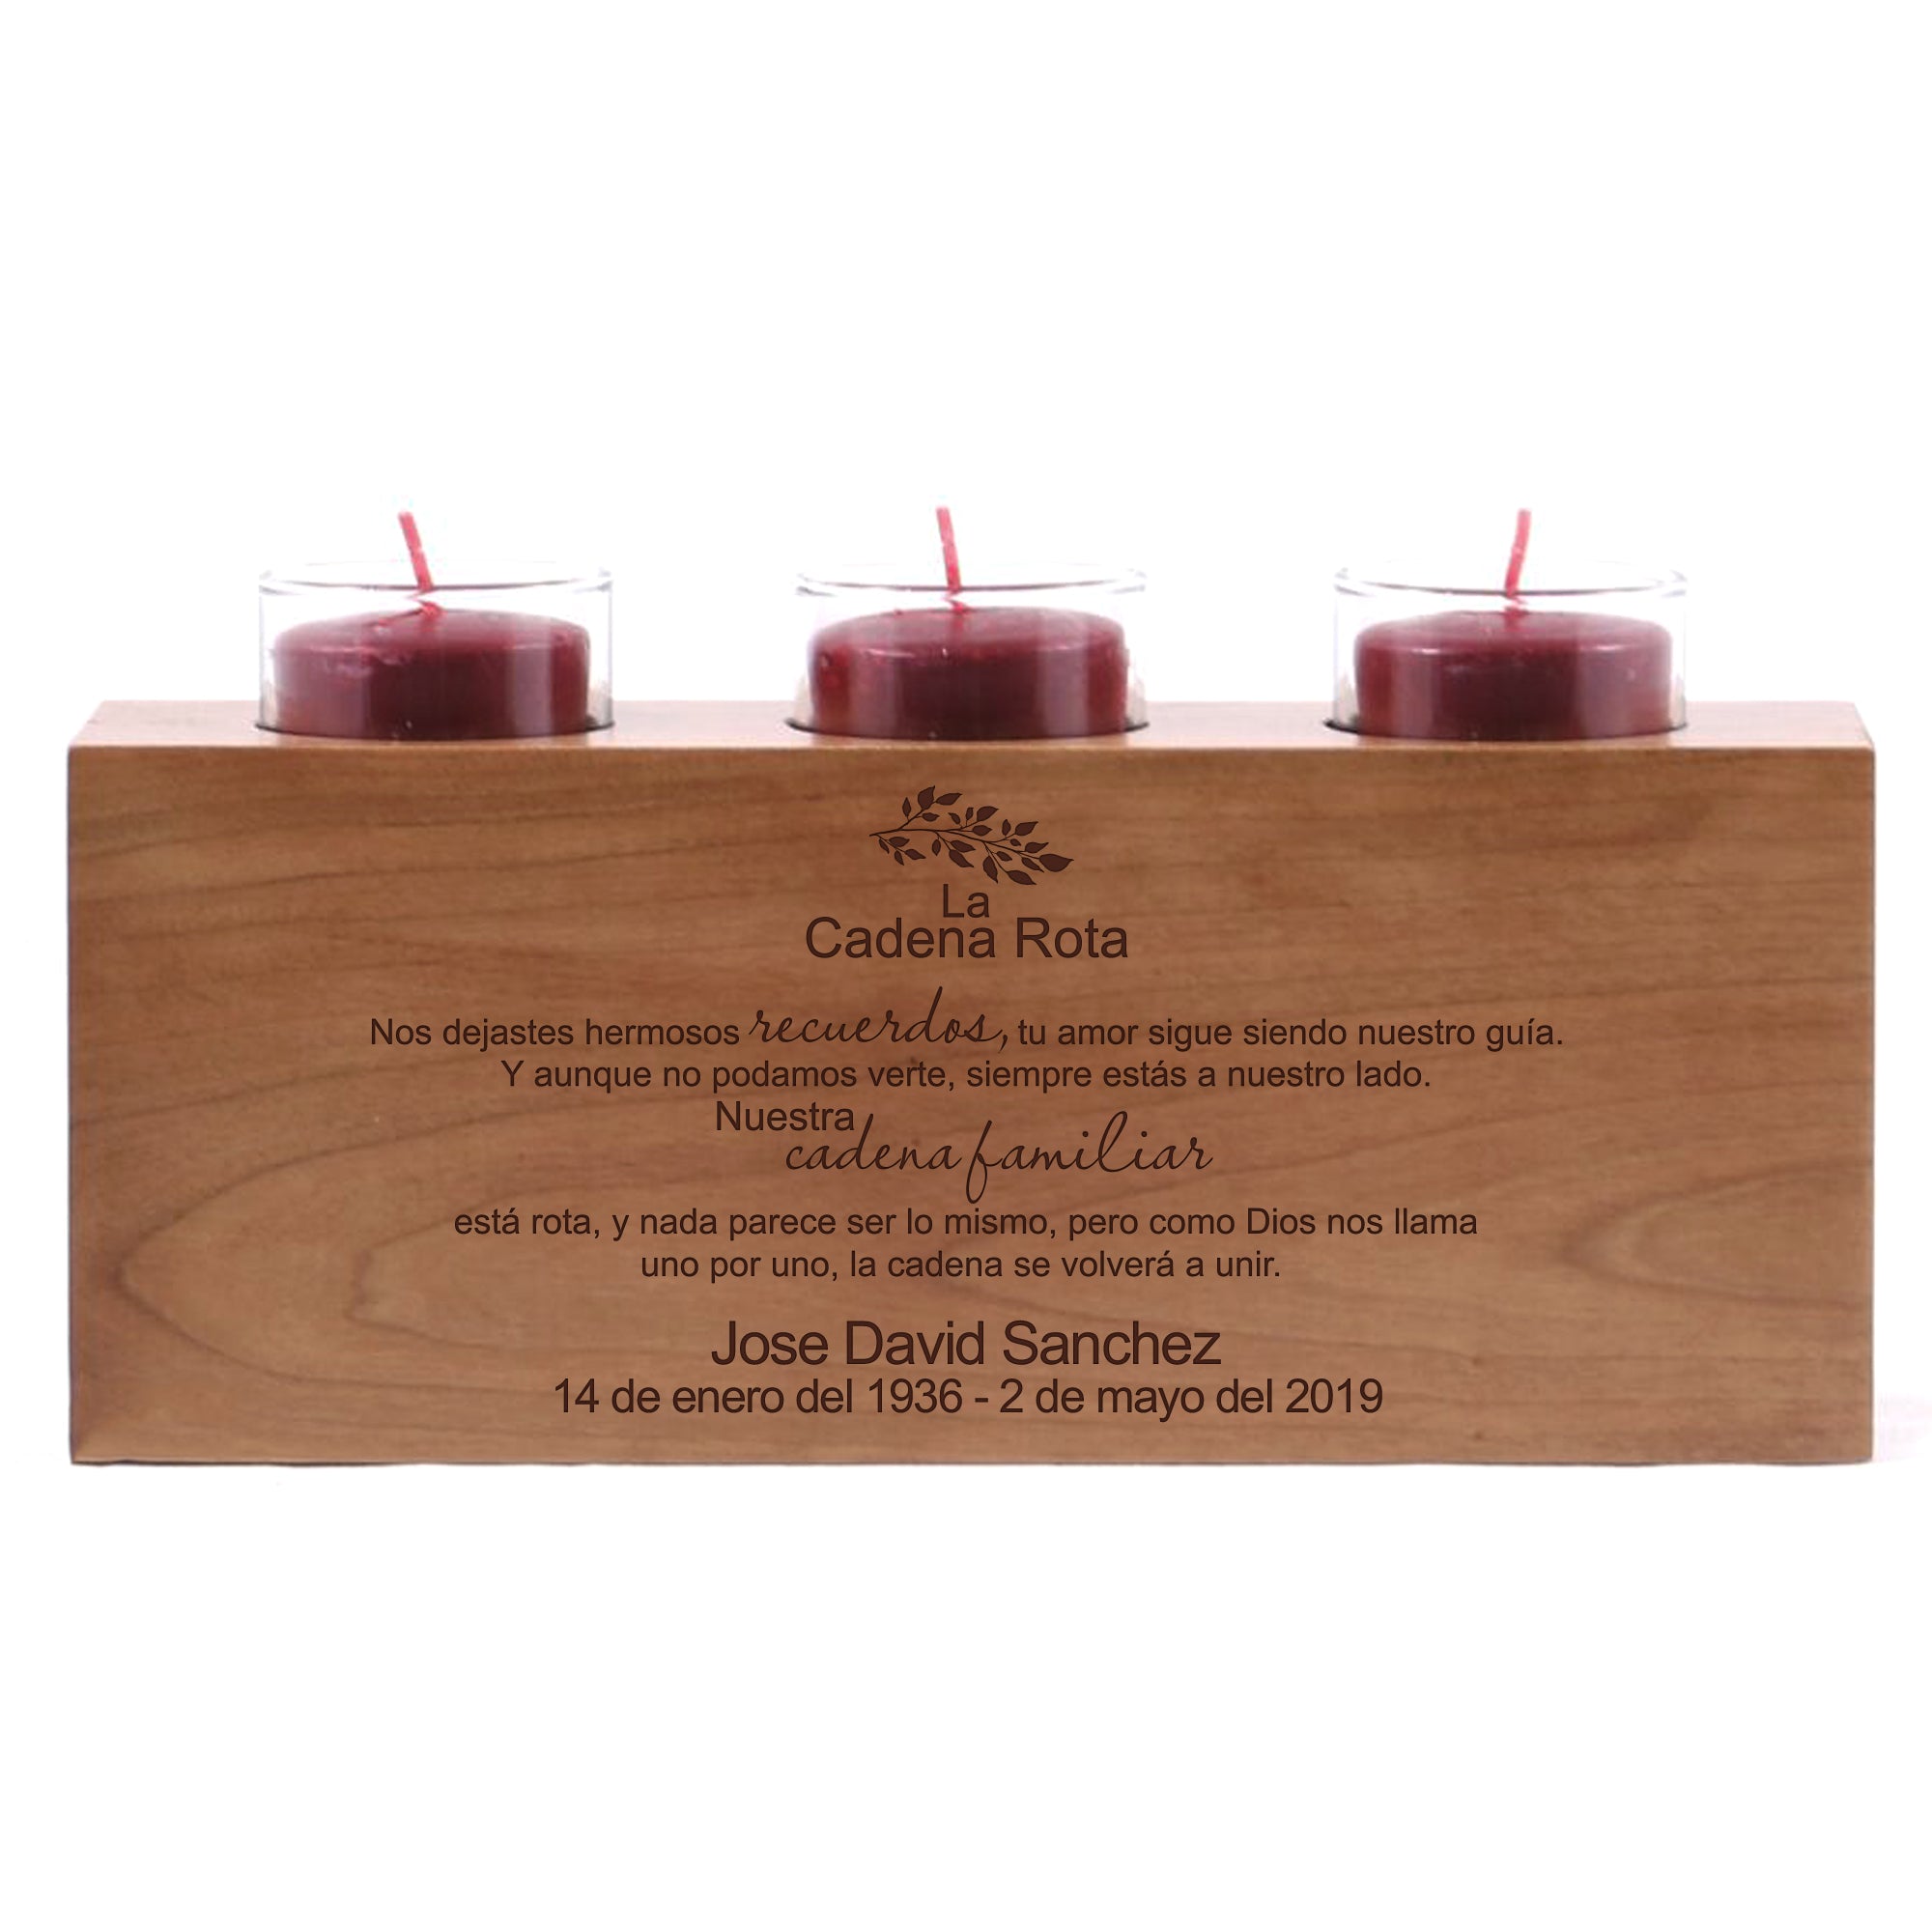 LifeSong Milestones Personalized Engraved Memorial Votive Candle Holder 10x4x4 Spanish The Broken Chain Wreath Poem Loss of Parents, Father, Mother Sympathy Gift Cherry